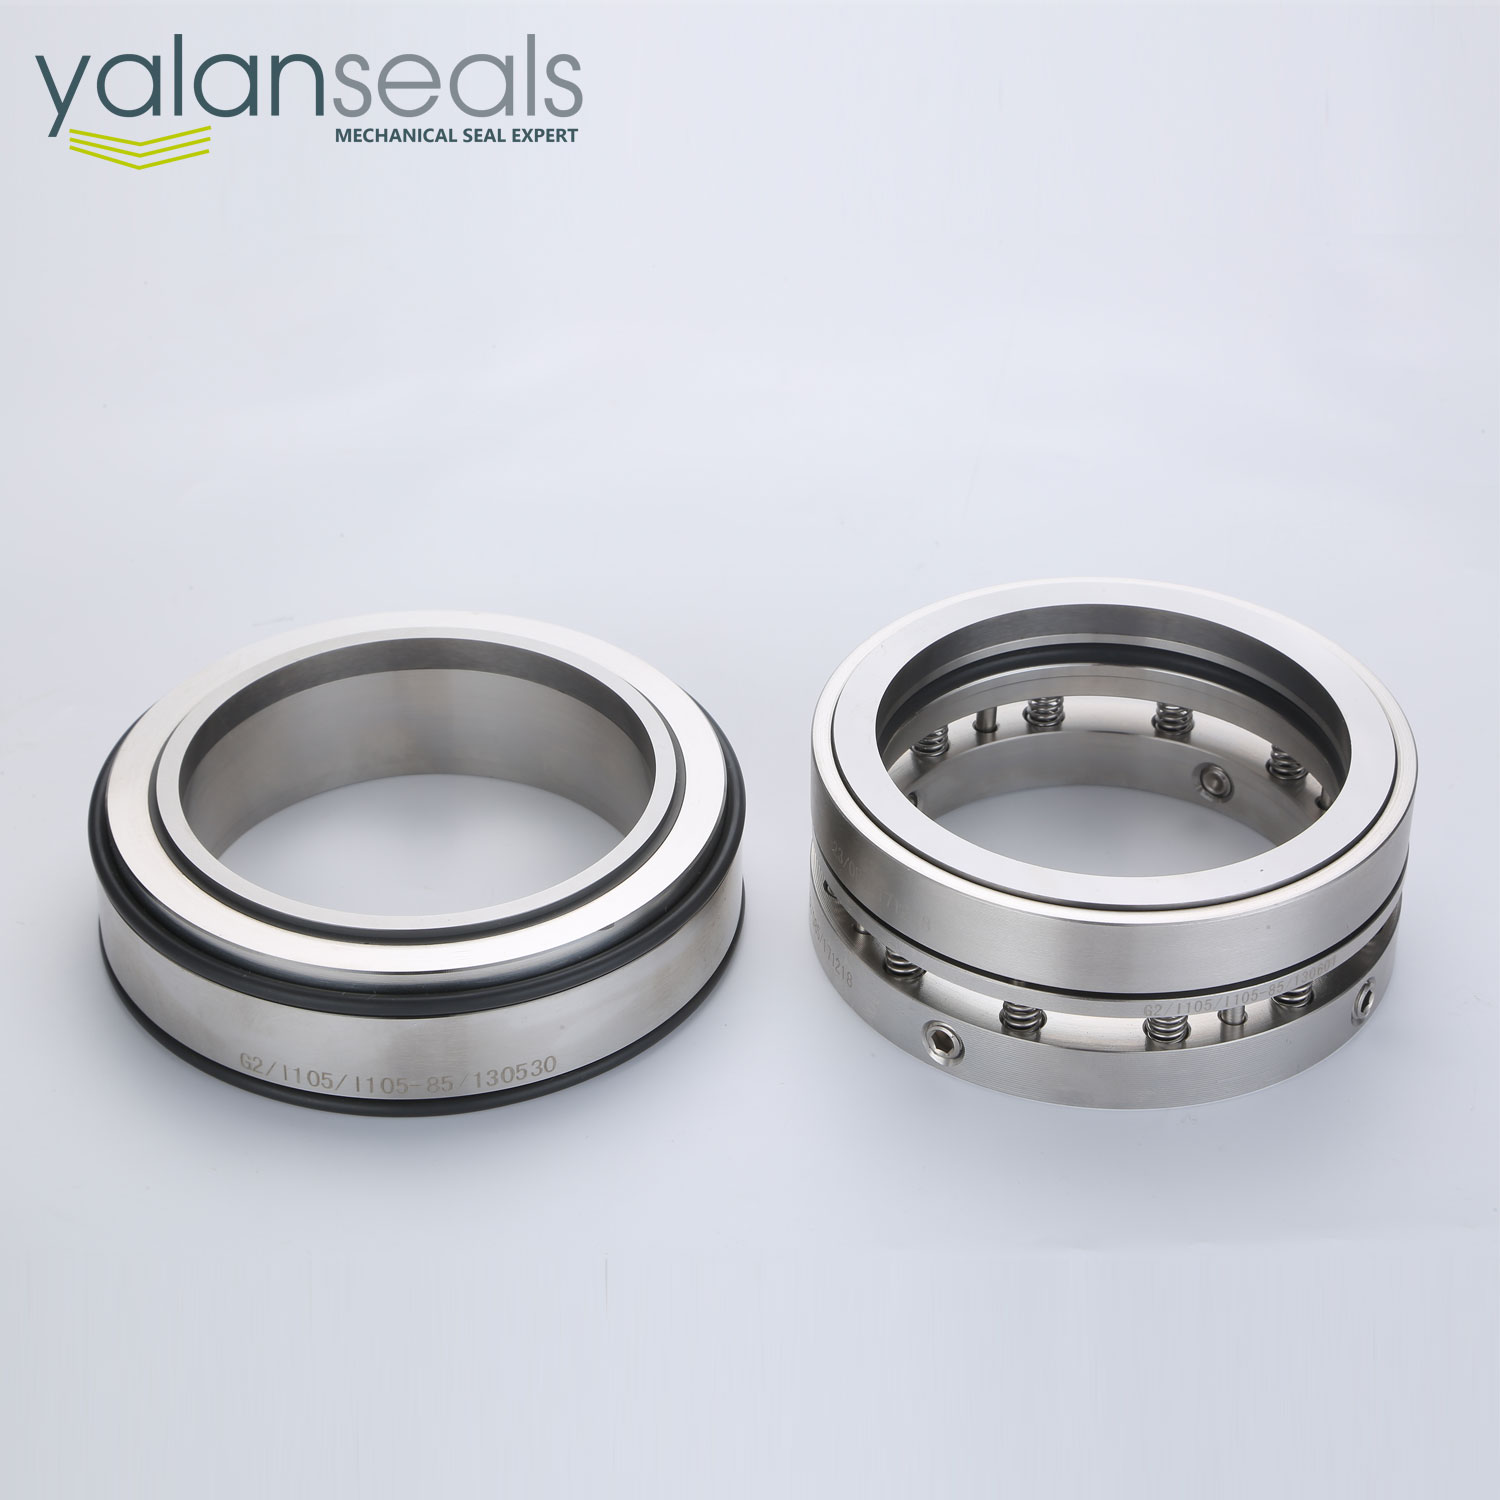 YALAN I105 Multi-spring Mechanical Seal for Chemical Centrifugal Pumps, Screw Pumps, and Sewage Pumps